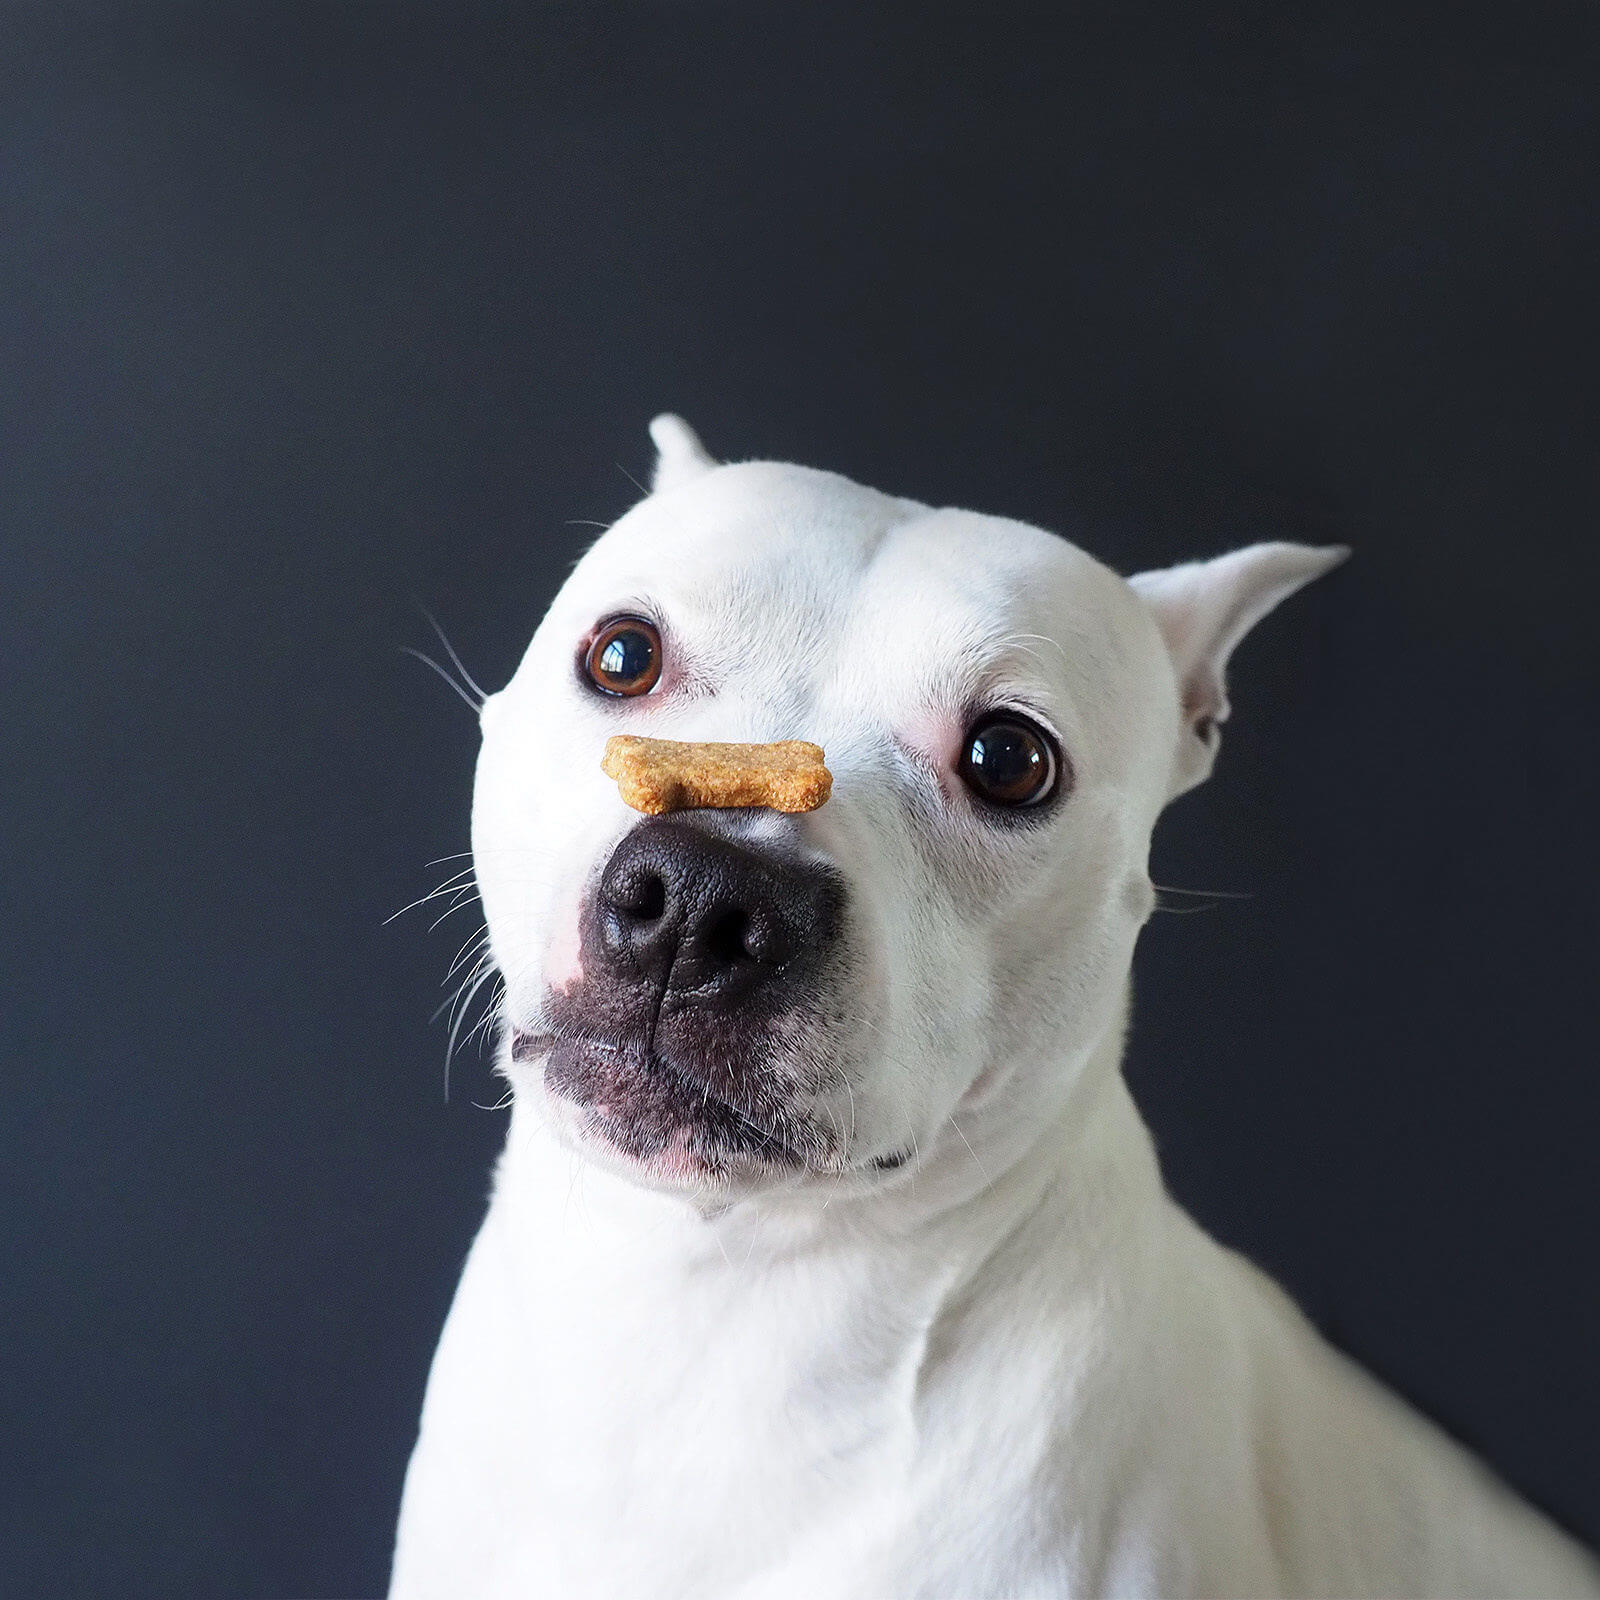 Ike Bites Dog Treats is a nonprofit that uses iNET marketing photography to raise money for special needs individuals